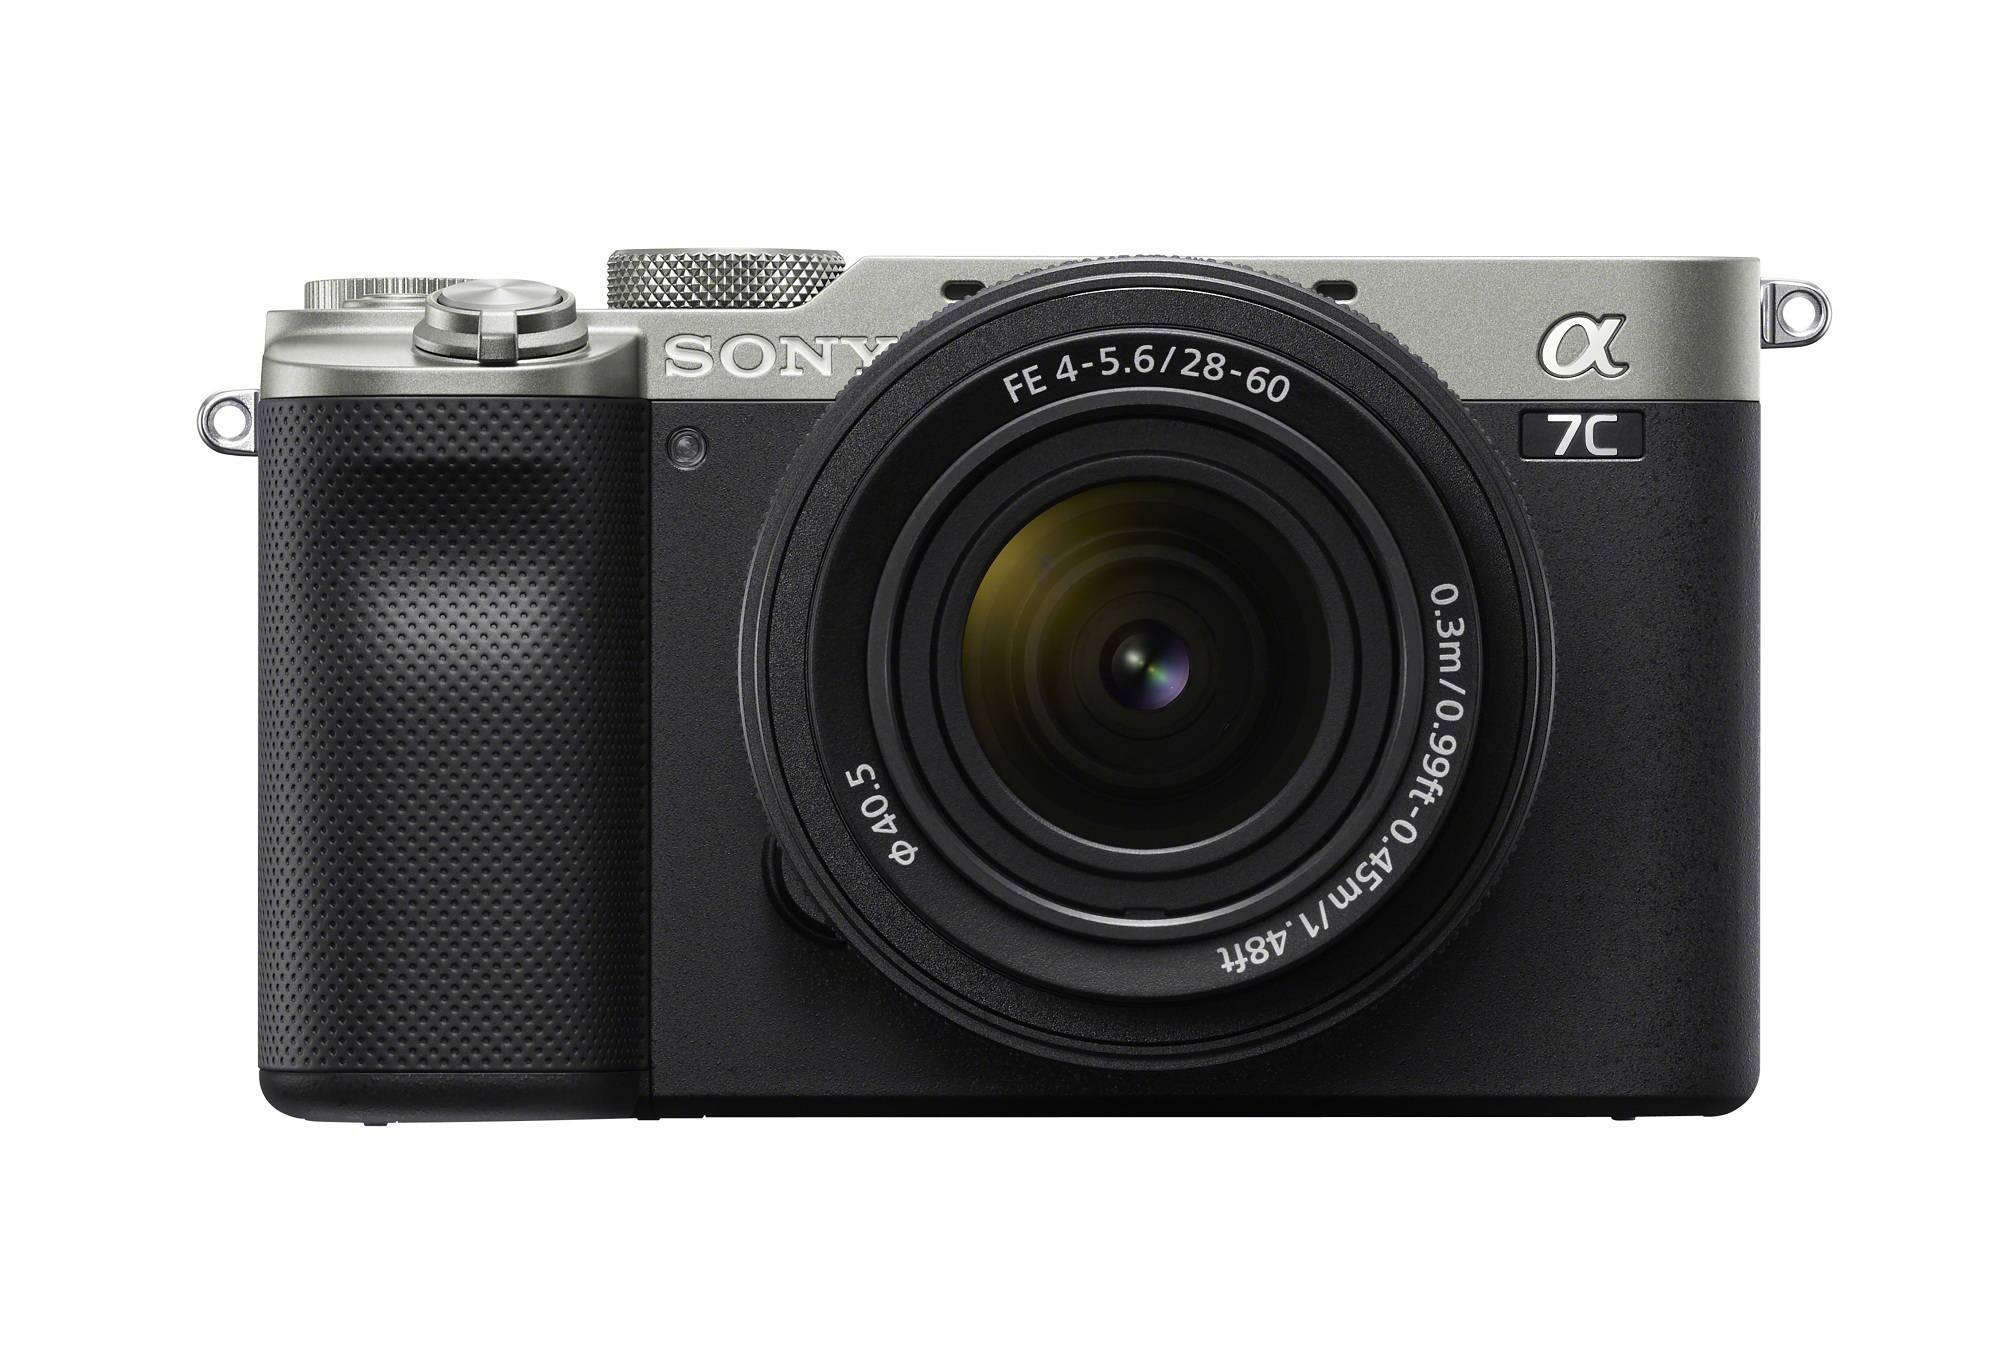 Sony Alpha a7C Full-Frame Compact Mirrorless Camera with FE 28-60mm f/4-5.6 Lens (Silver)